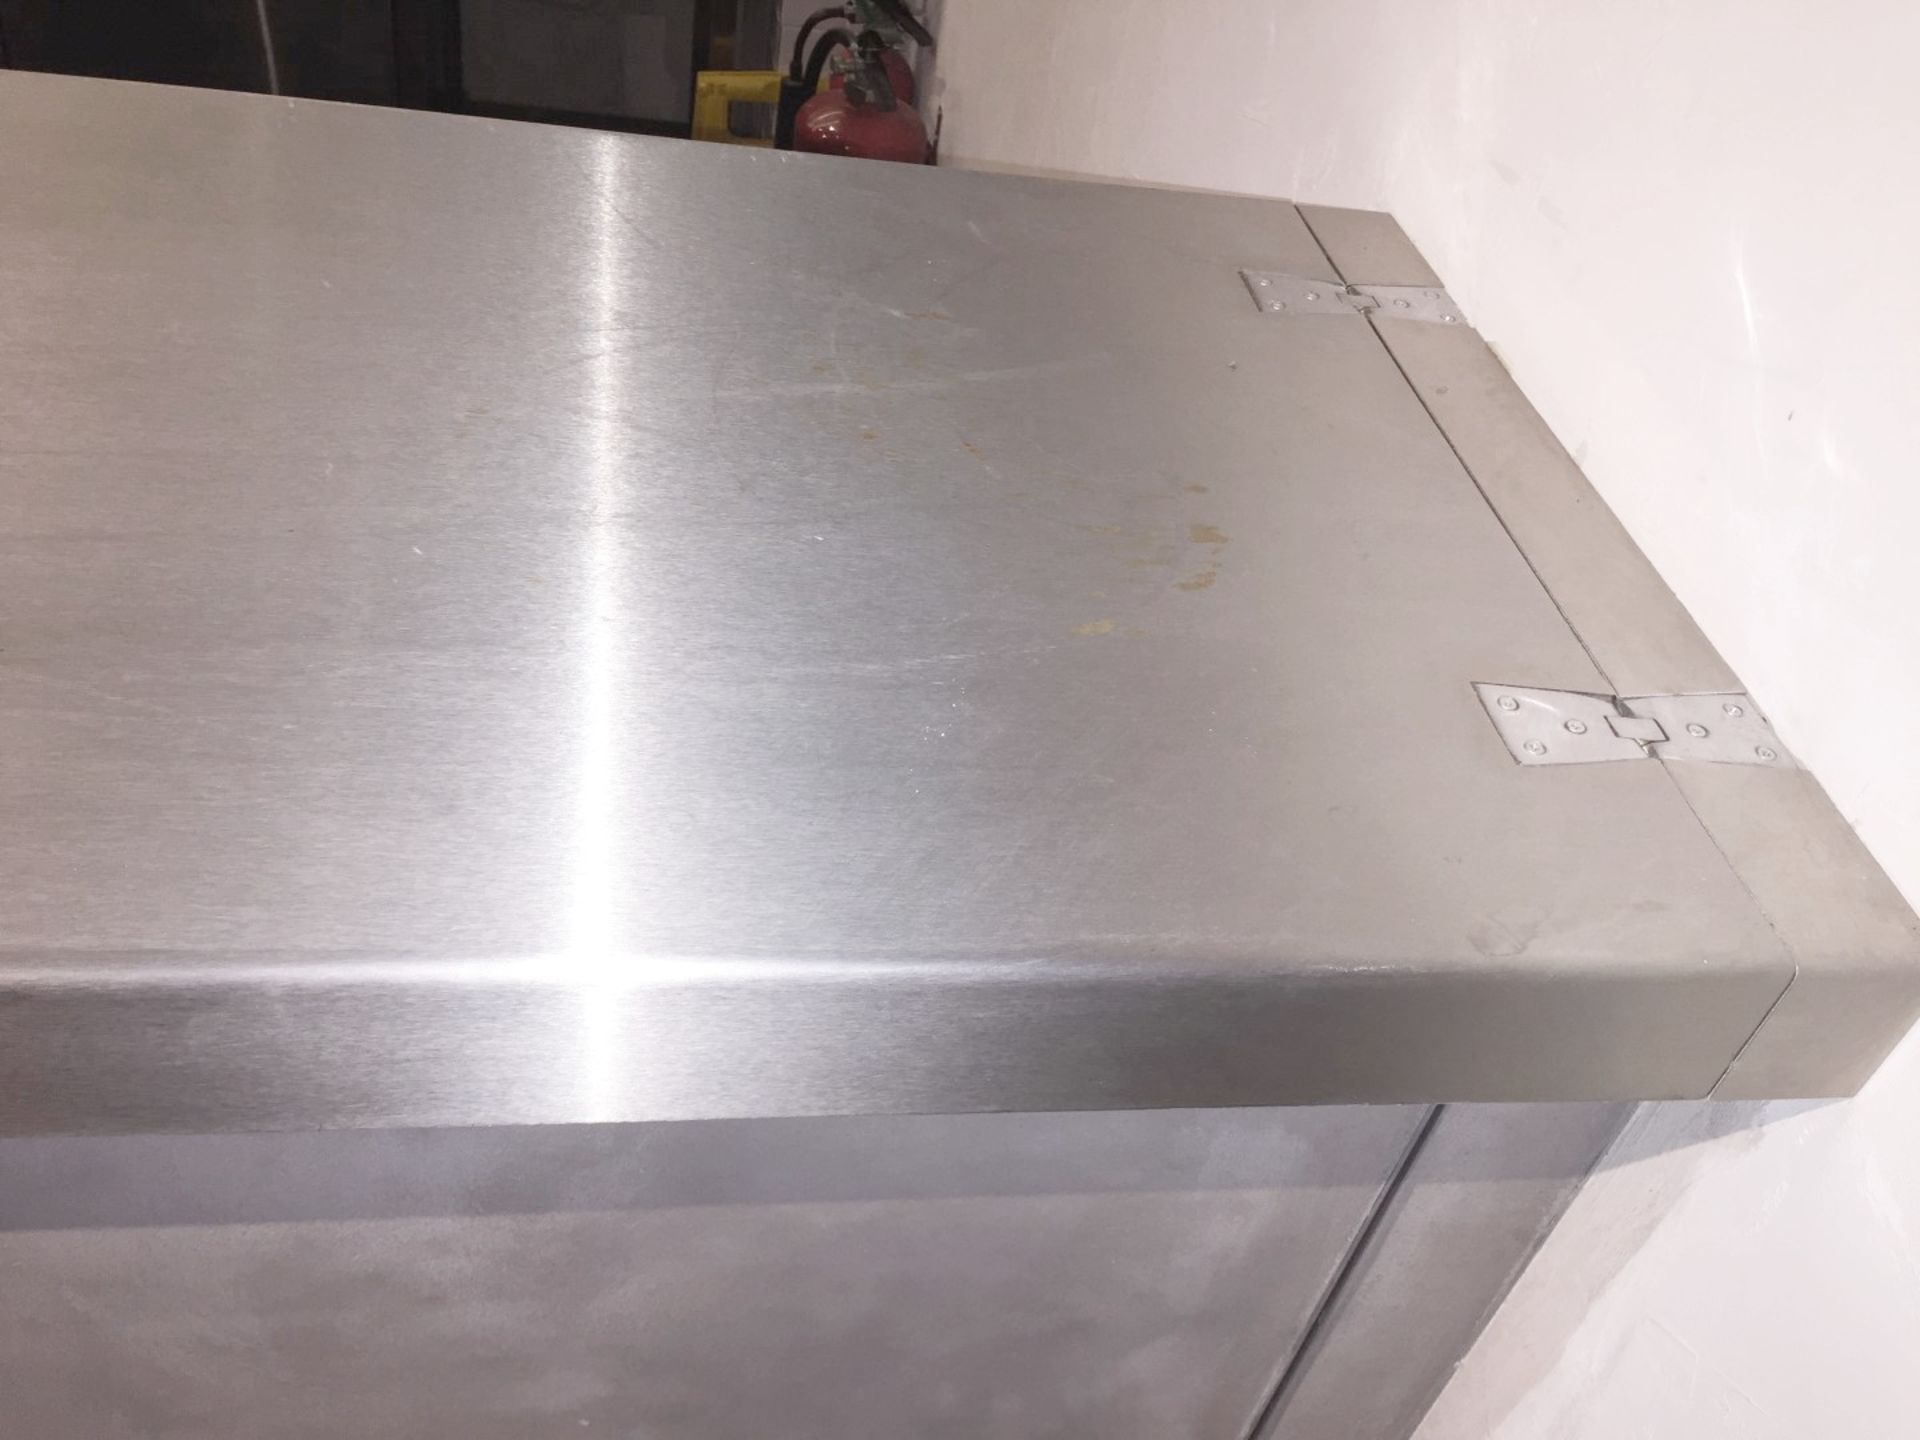 1 x Restaurant Serving Counter Featuring Stainless Steel Top And Hatches At Both Ends - Originally I - Image 8 of 11